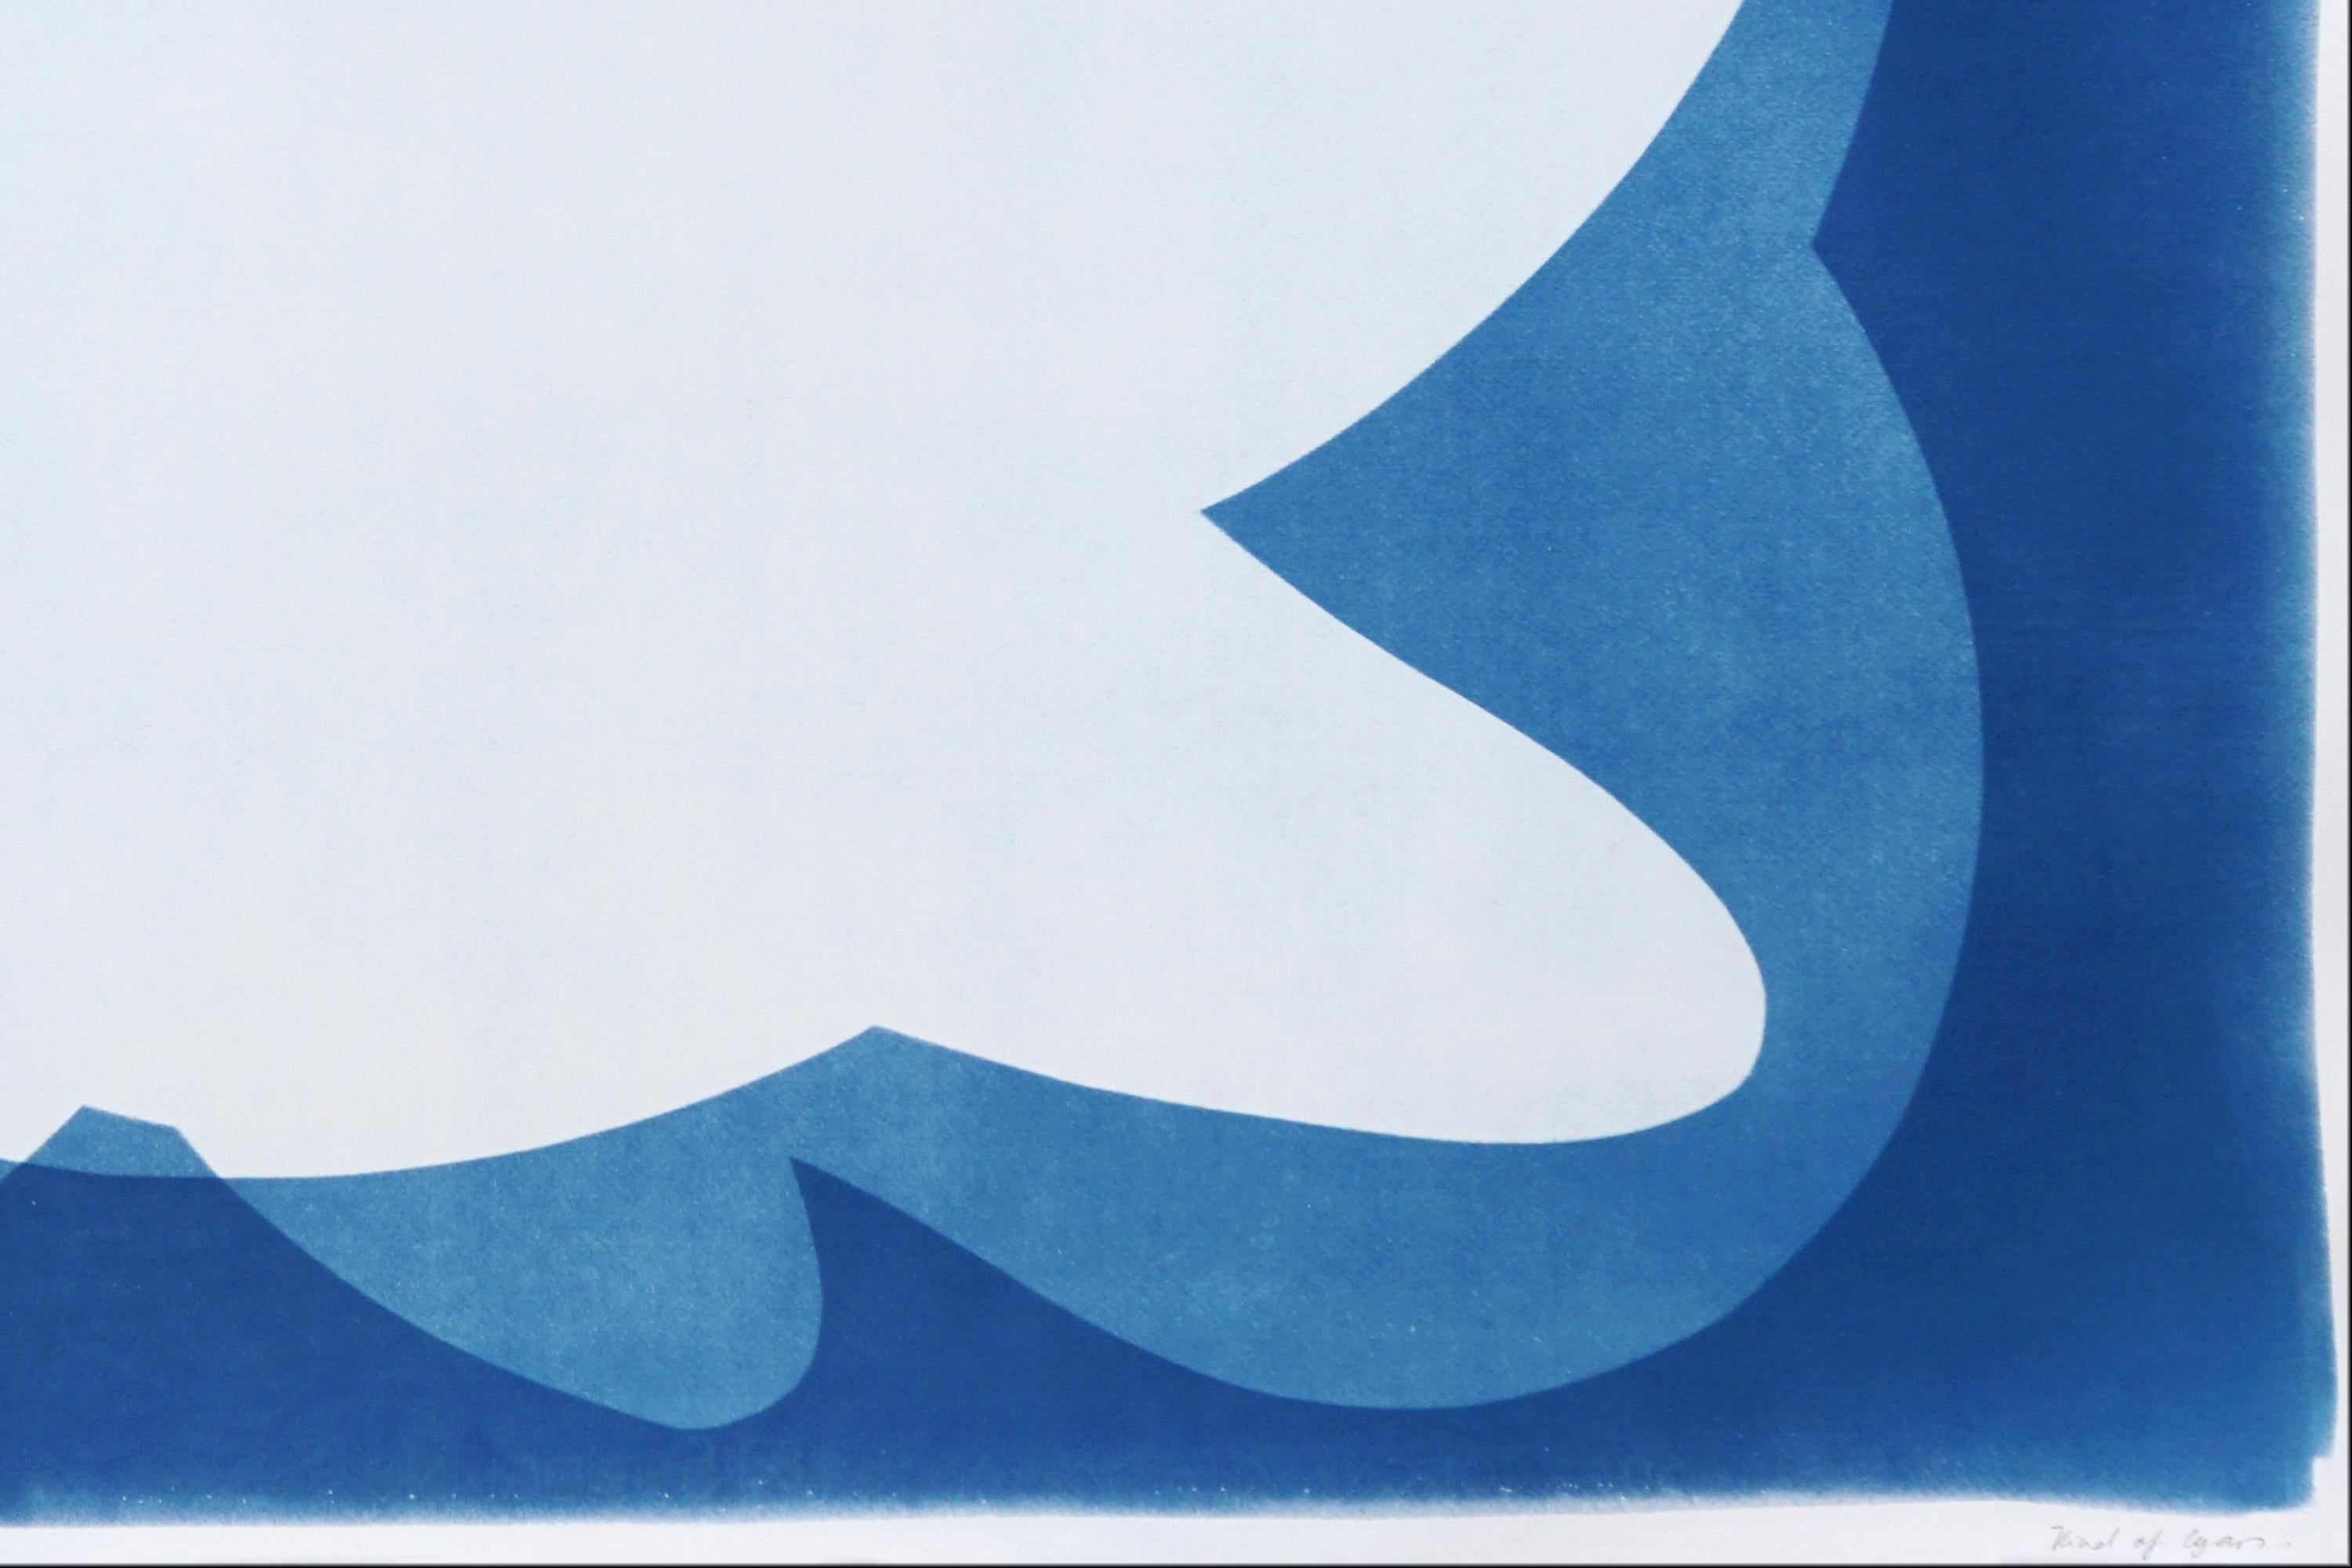 Octopus in the Ocean, White and Blue Handmade Cyanotype, Unique, Modern Forms 3